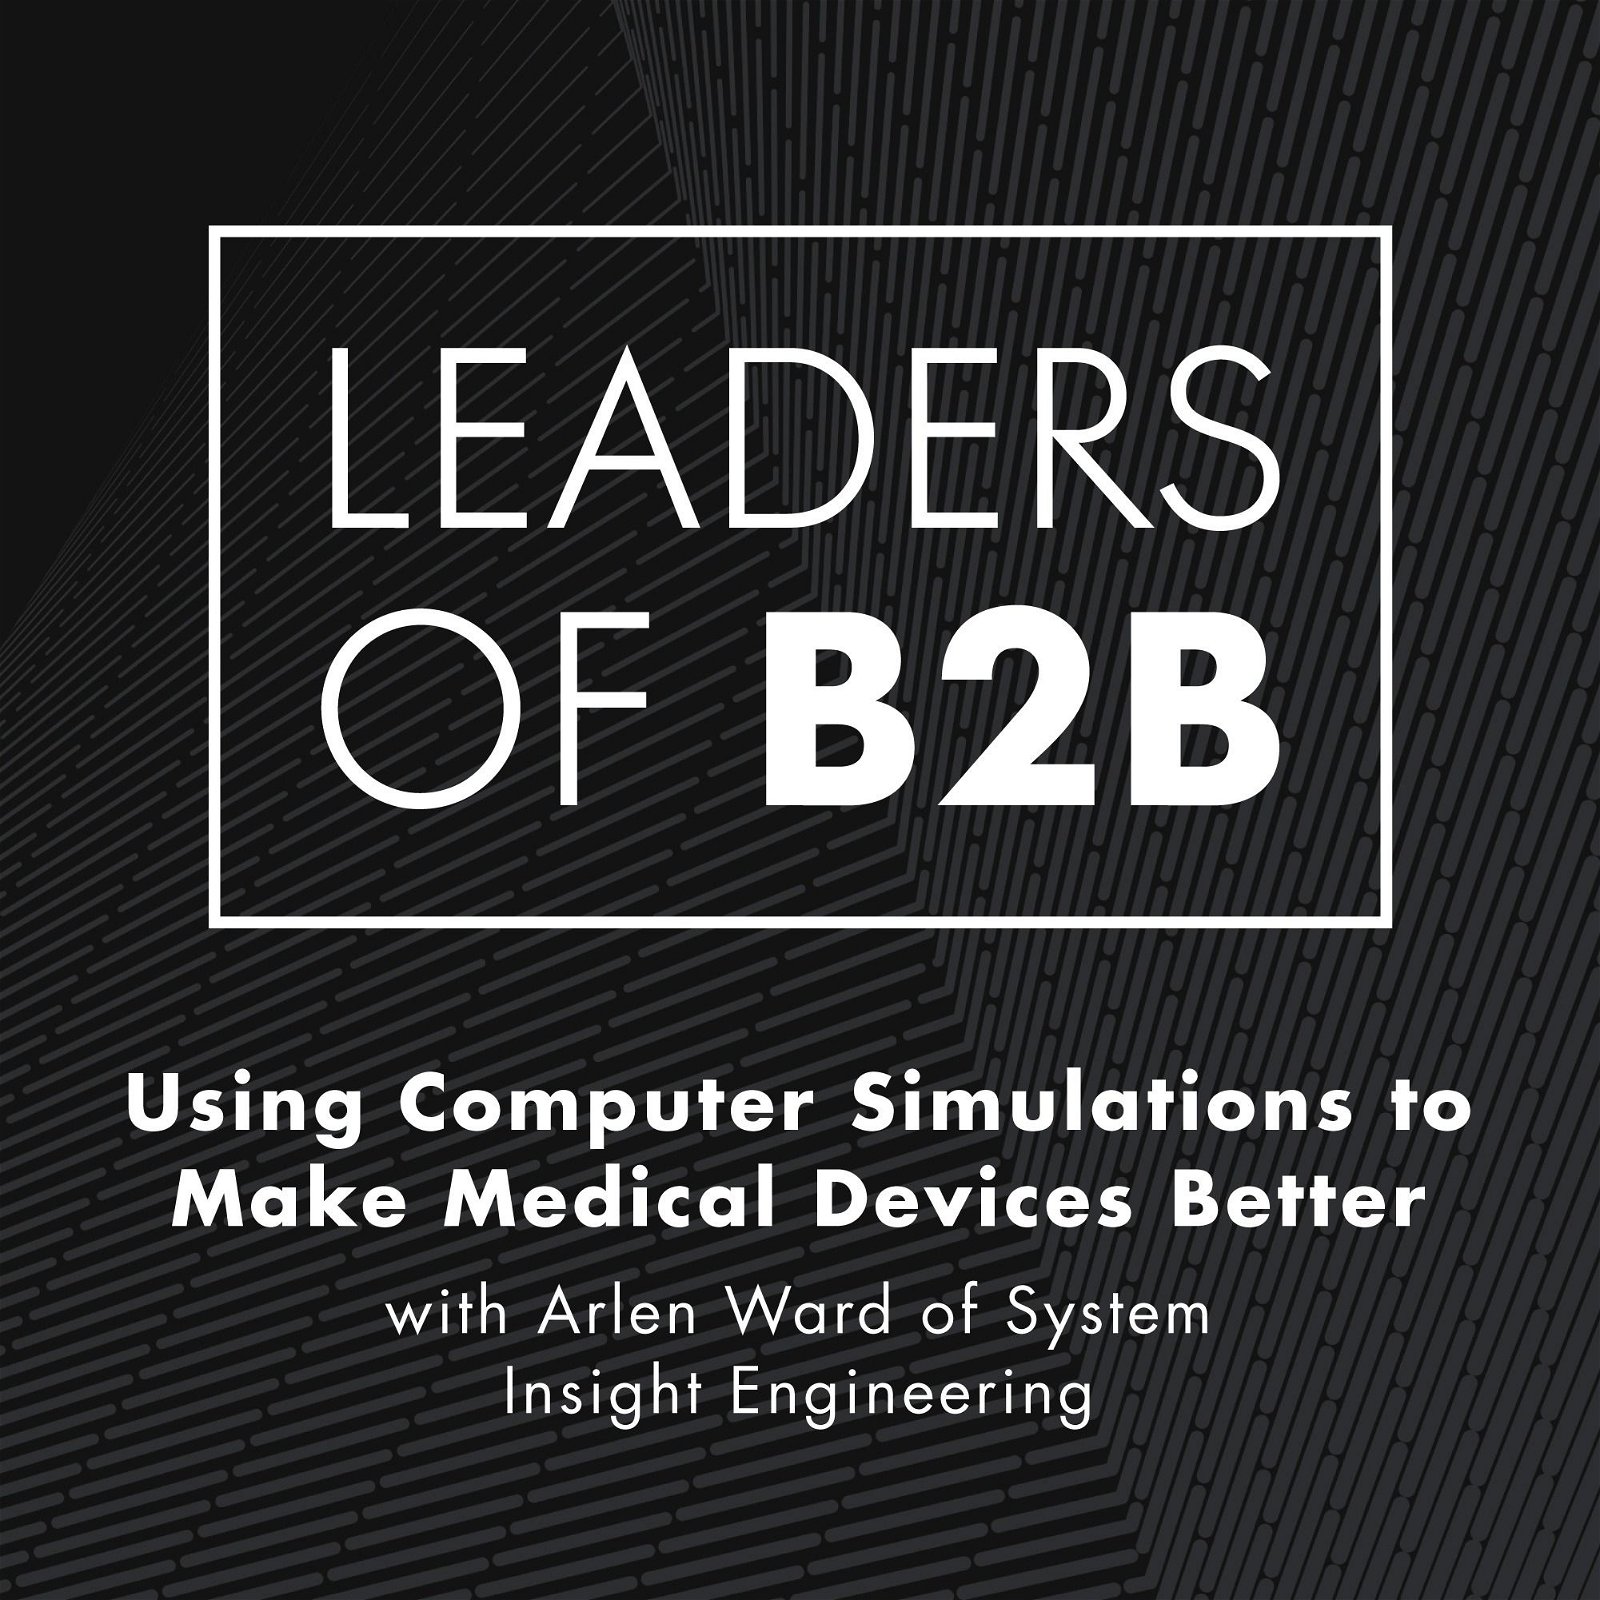 Using Computer Simulations to Make Medical Devices Better with Arlen Ward of System Insight Engineering